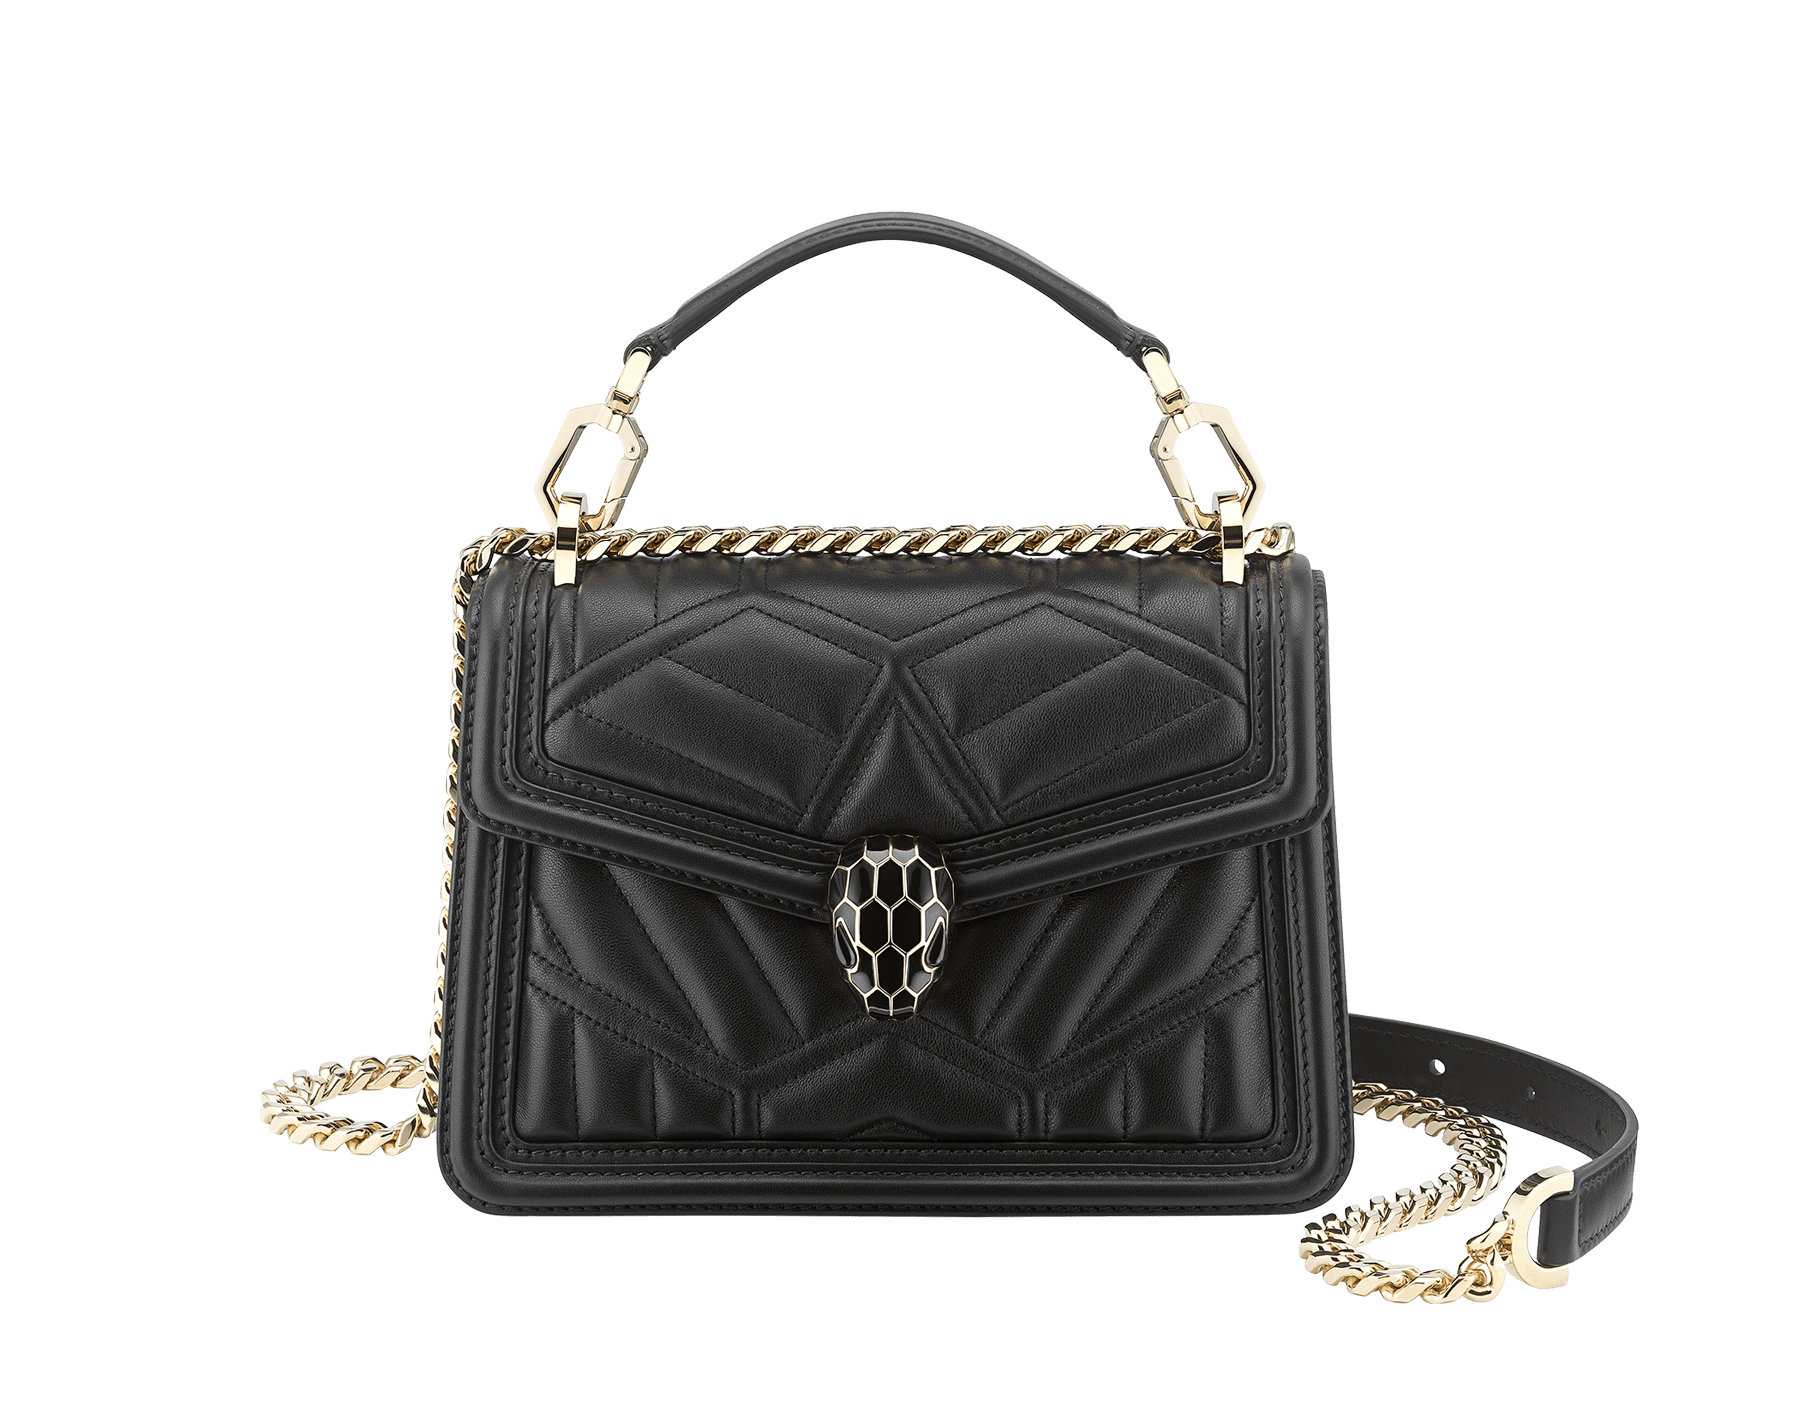 “Serpenti Diamond Blast” crossbody bag in Ivory Opal white quilted nappa leather body, featuring a maxi matelassé pattern, and black calf leather frames, with black nappa leather internal lining. Tempting snakehead closure in light gold plated brass enriched with black enamel and black onyx eyes. 1063-MFQD image 1